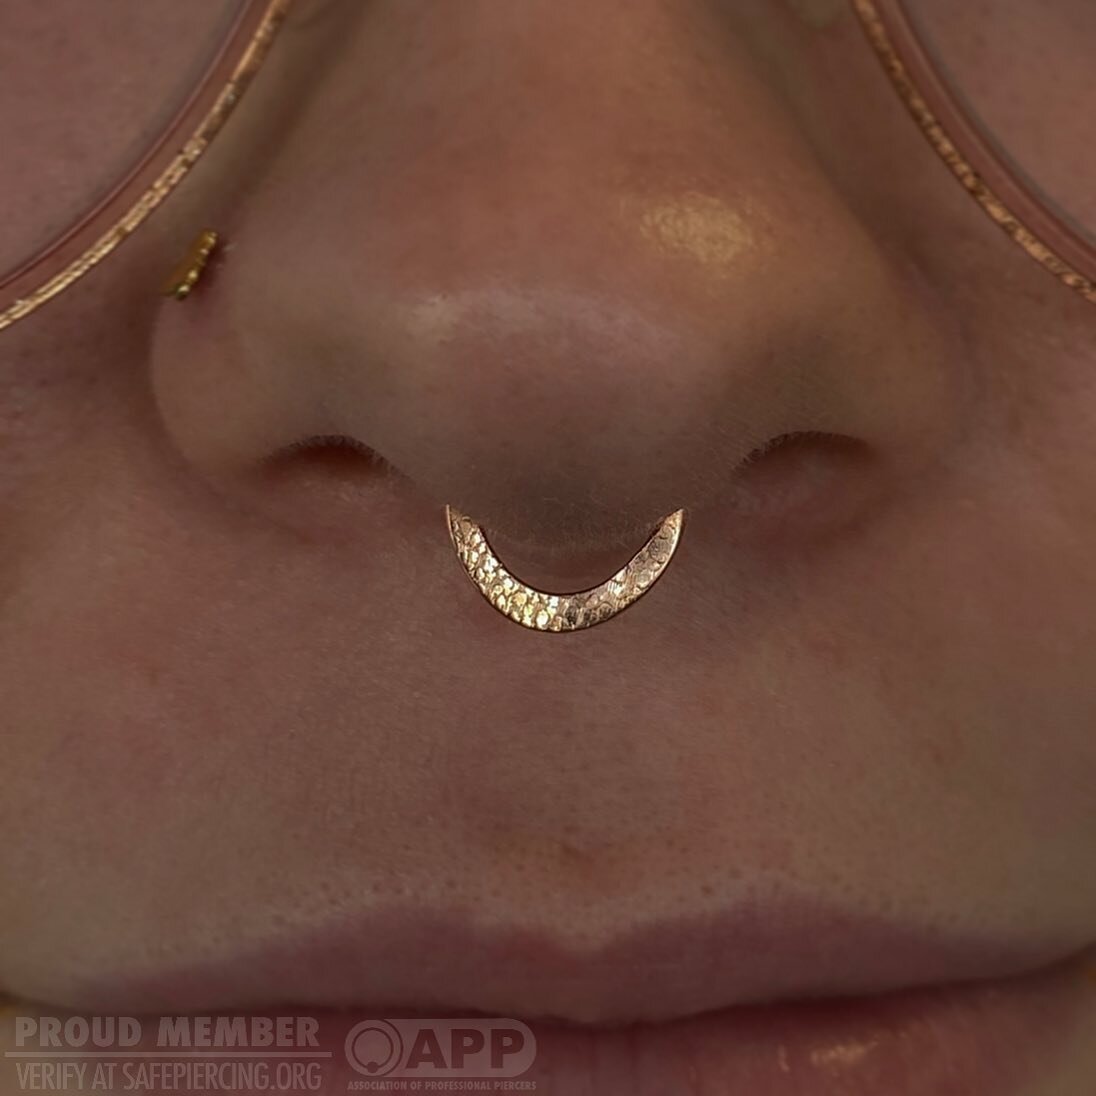 Adorable septum piercing done using @stargazerfinejewelry in rose gold 😍

This beautiful ring is also reversible for a different texture and style!

You can find me at @vanityottawa 

#safepiercing 
#septum 
#septumpiercing 
#ottawapiercer
#piercing